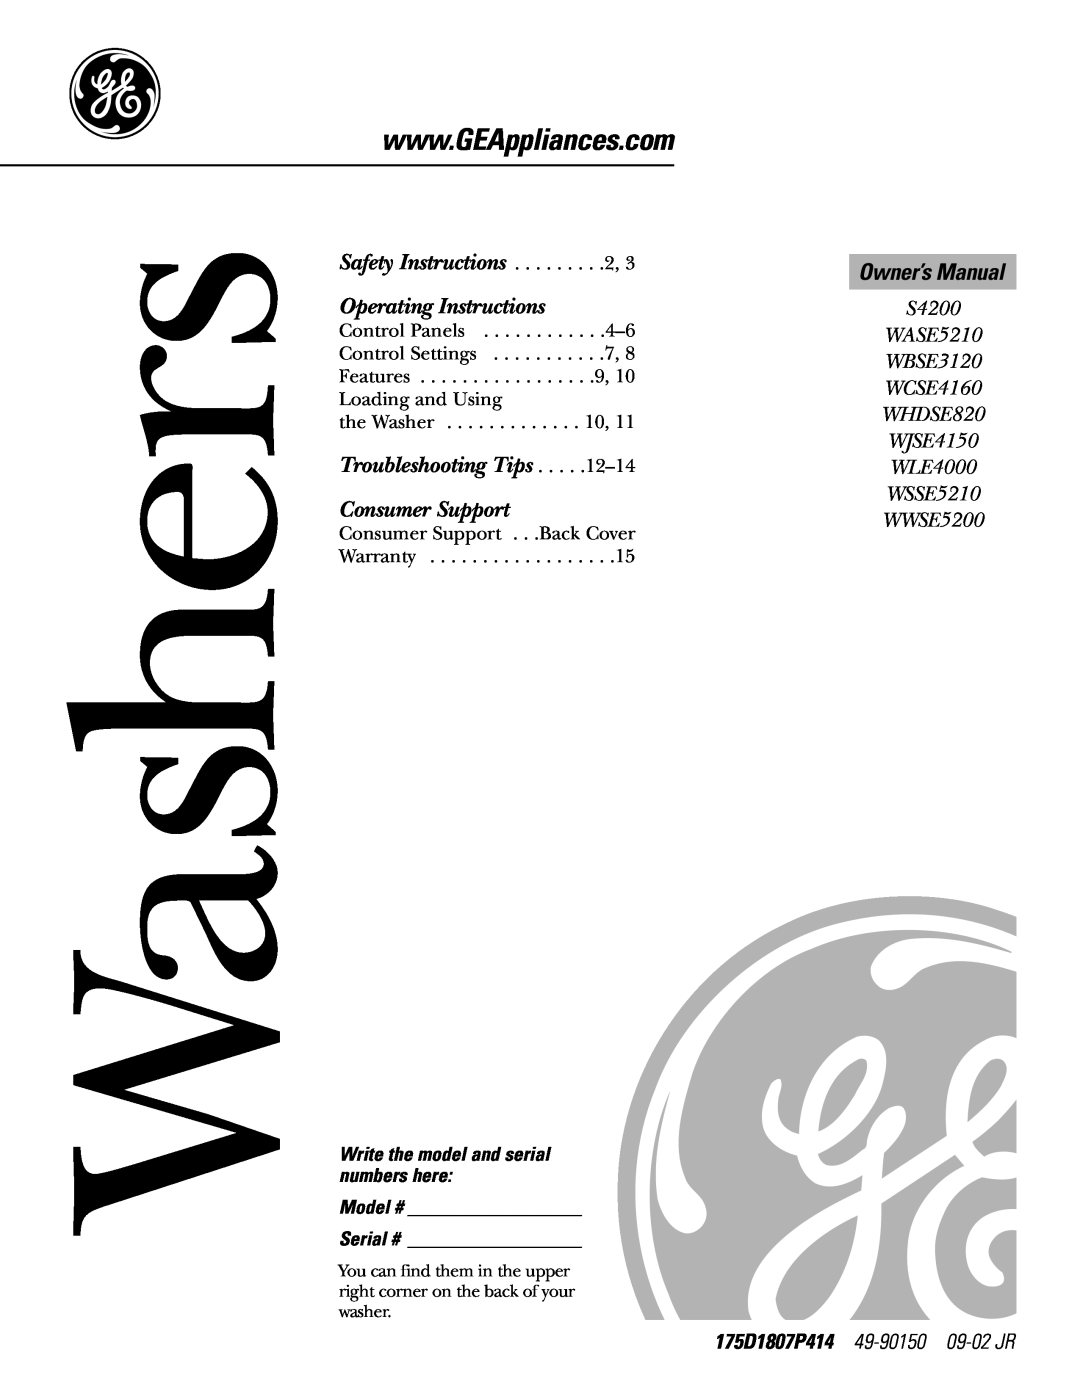 GE S4200 owner manual Owner’s Manual, 175D1807P414 49-90150 09-02JR, Washers, Operating Instructions, Consumer Support 